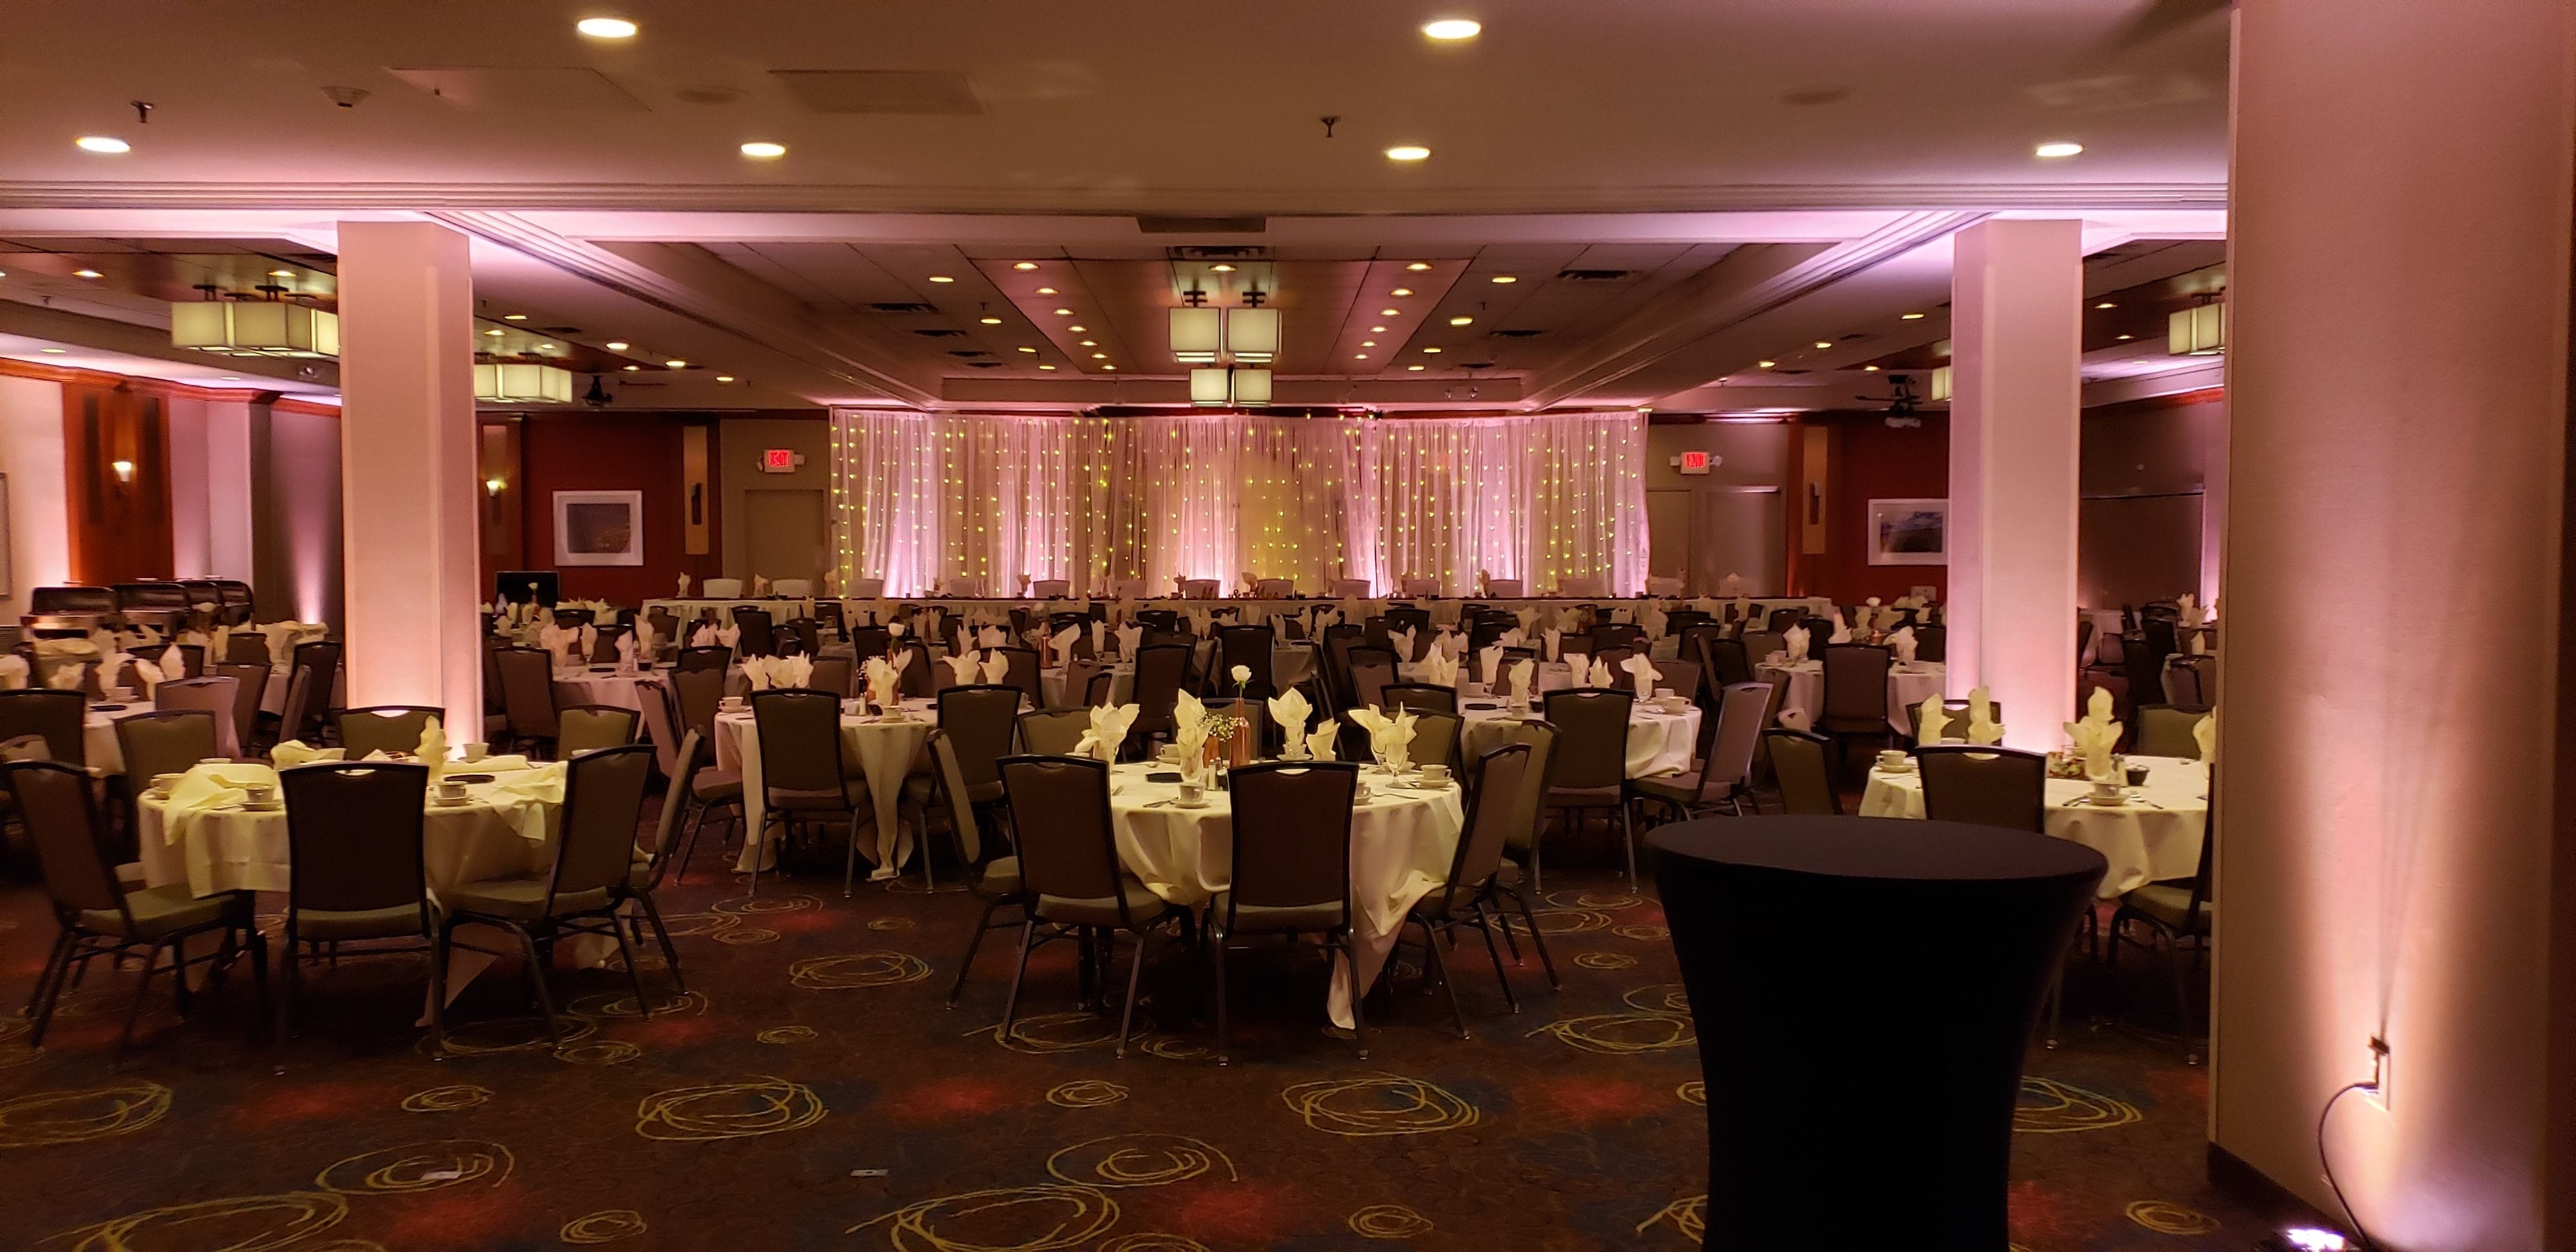 Holiday Inn, Duluth
Great Lakes Ballroom with rose gold up lighting and a head table backdrop.